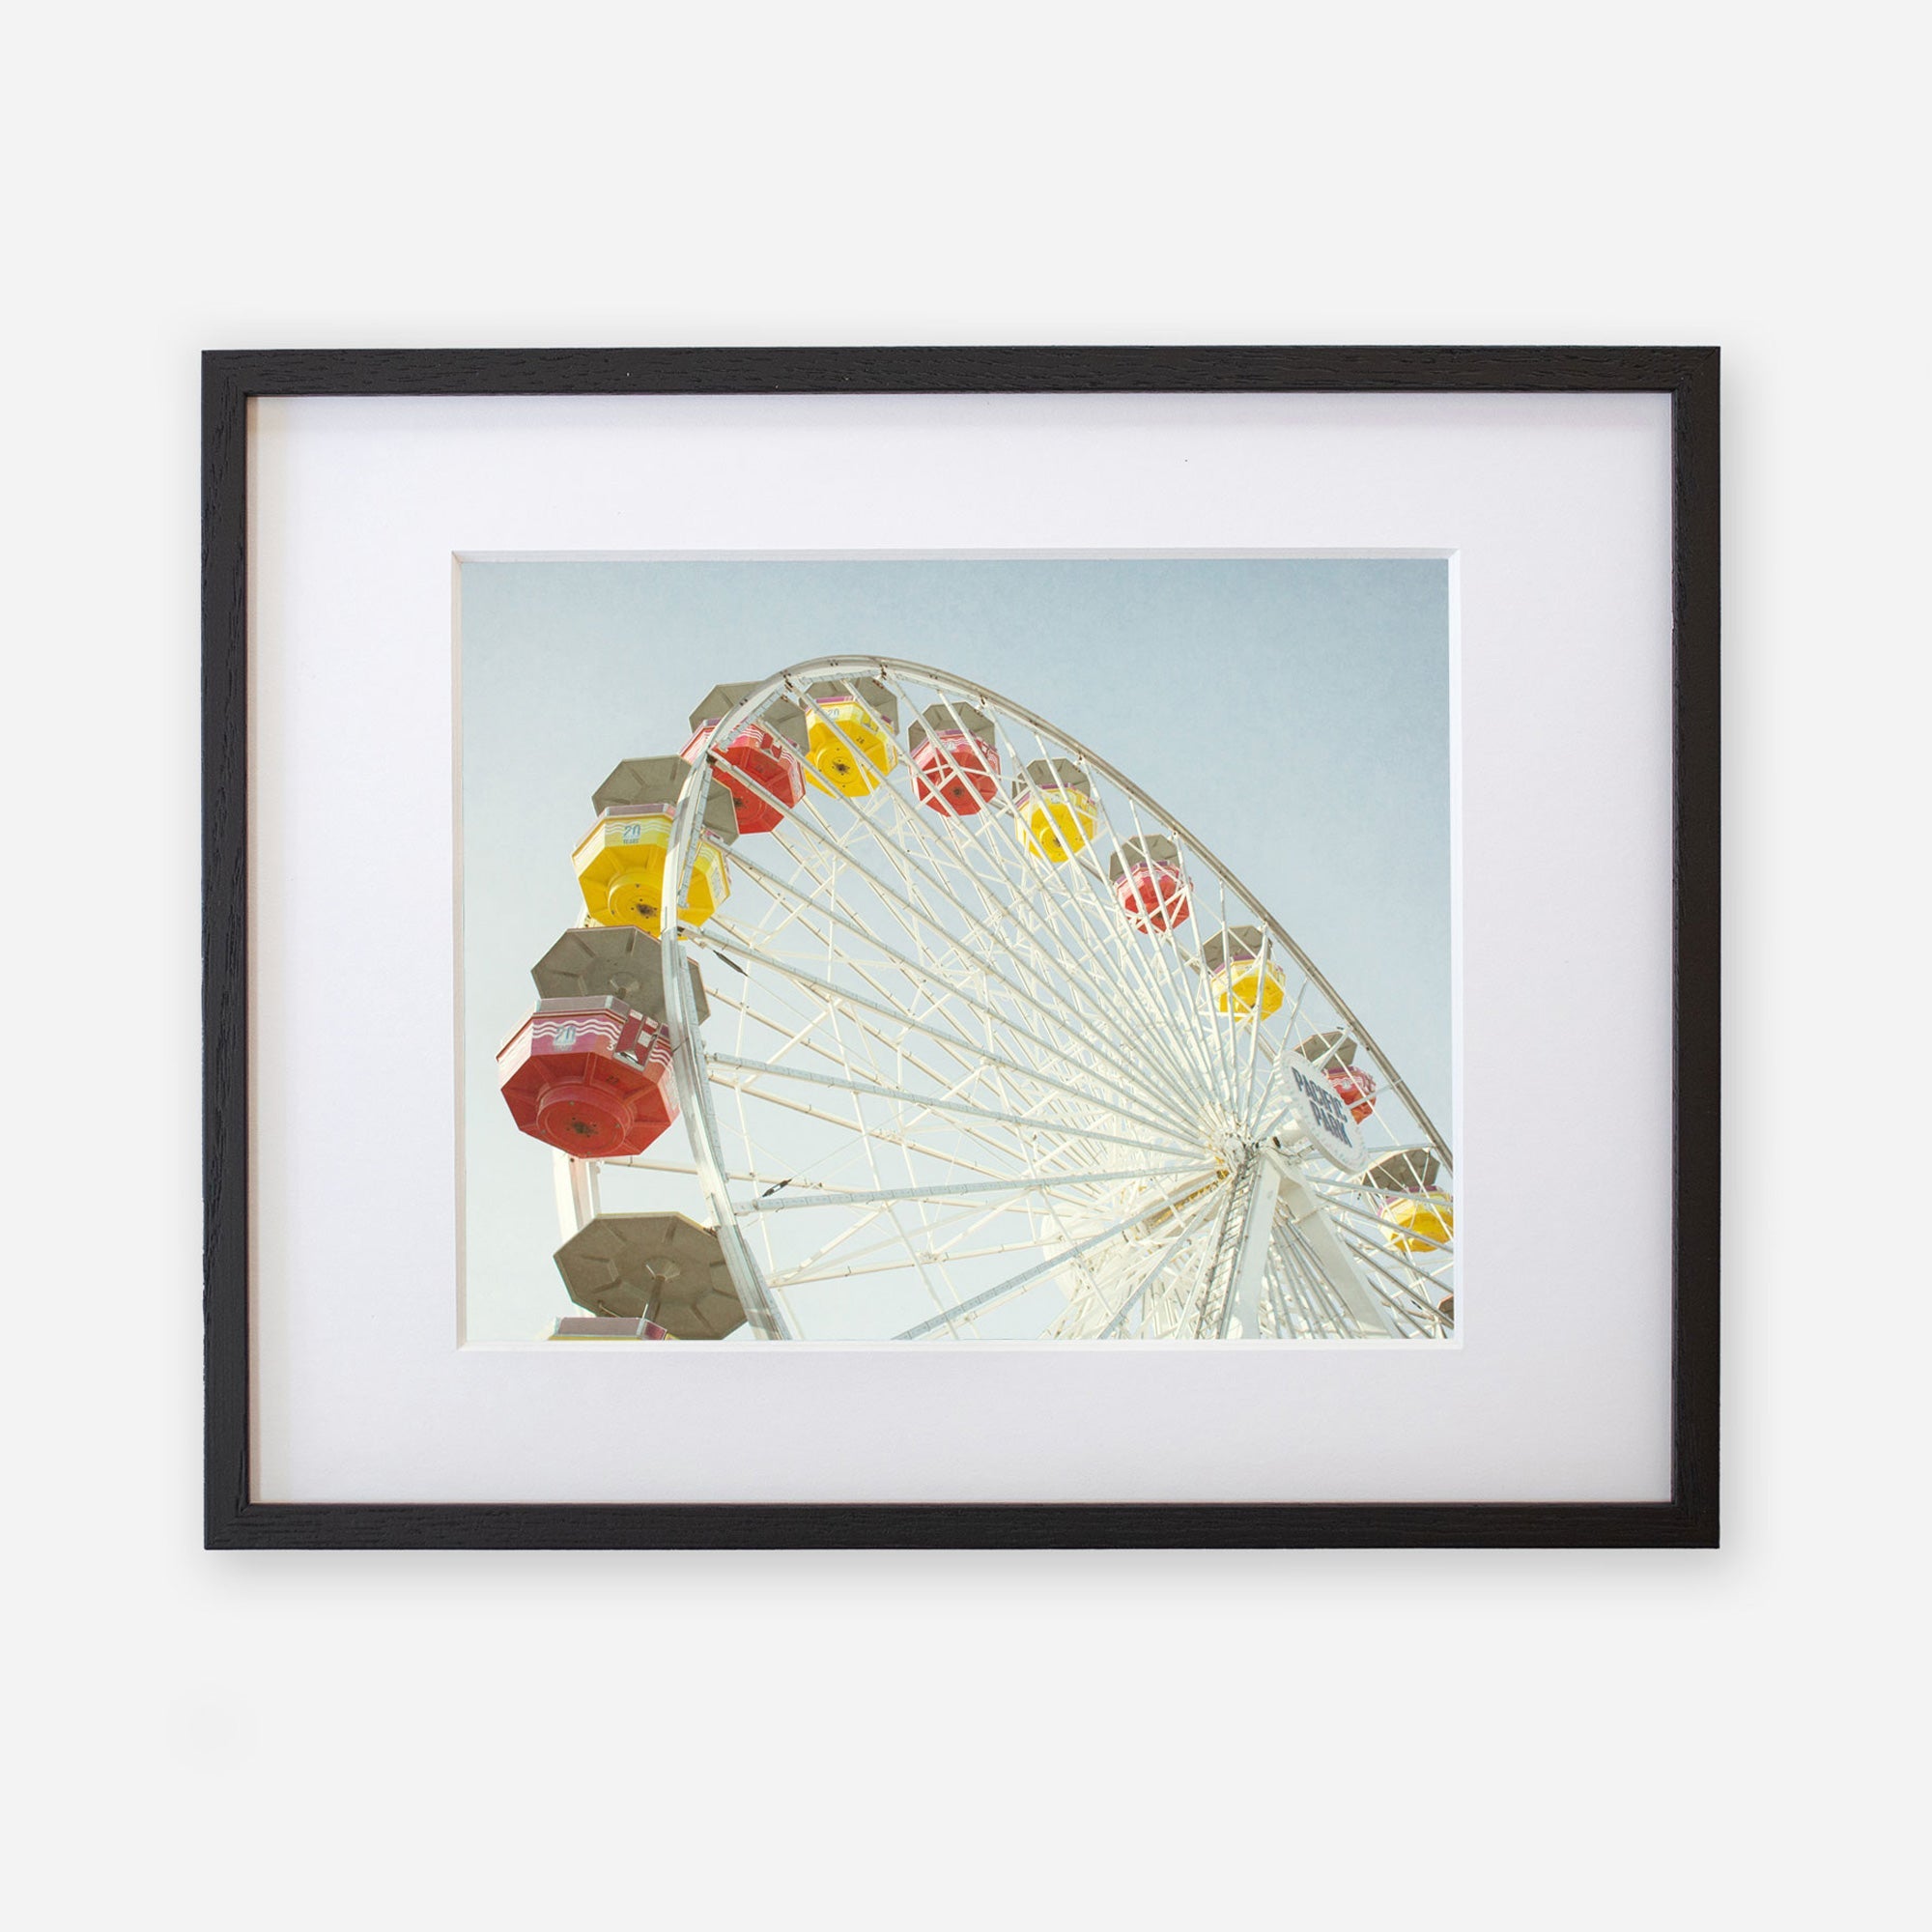 A framed photograph of a colorful Santa Monica Ferris Wheel Print, &#39;Ferris Above&#39;, printed on archival photographic paper, featuring brightly colored cabins in yellow, red, and orange against a clear sky. Brand: Offley Green.